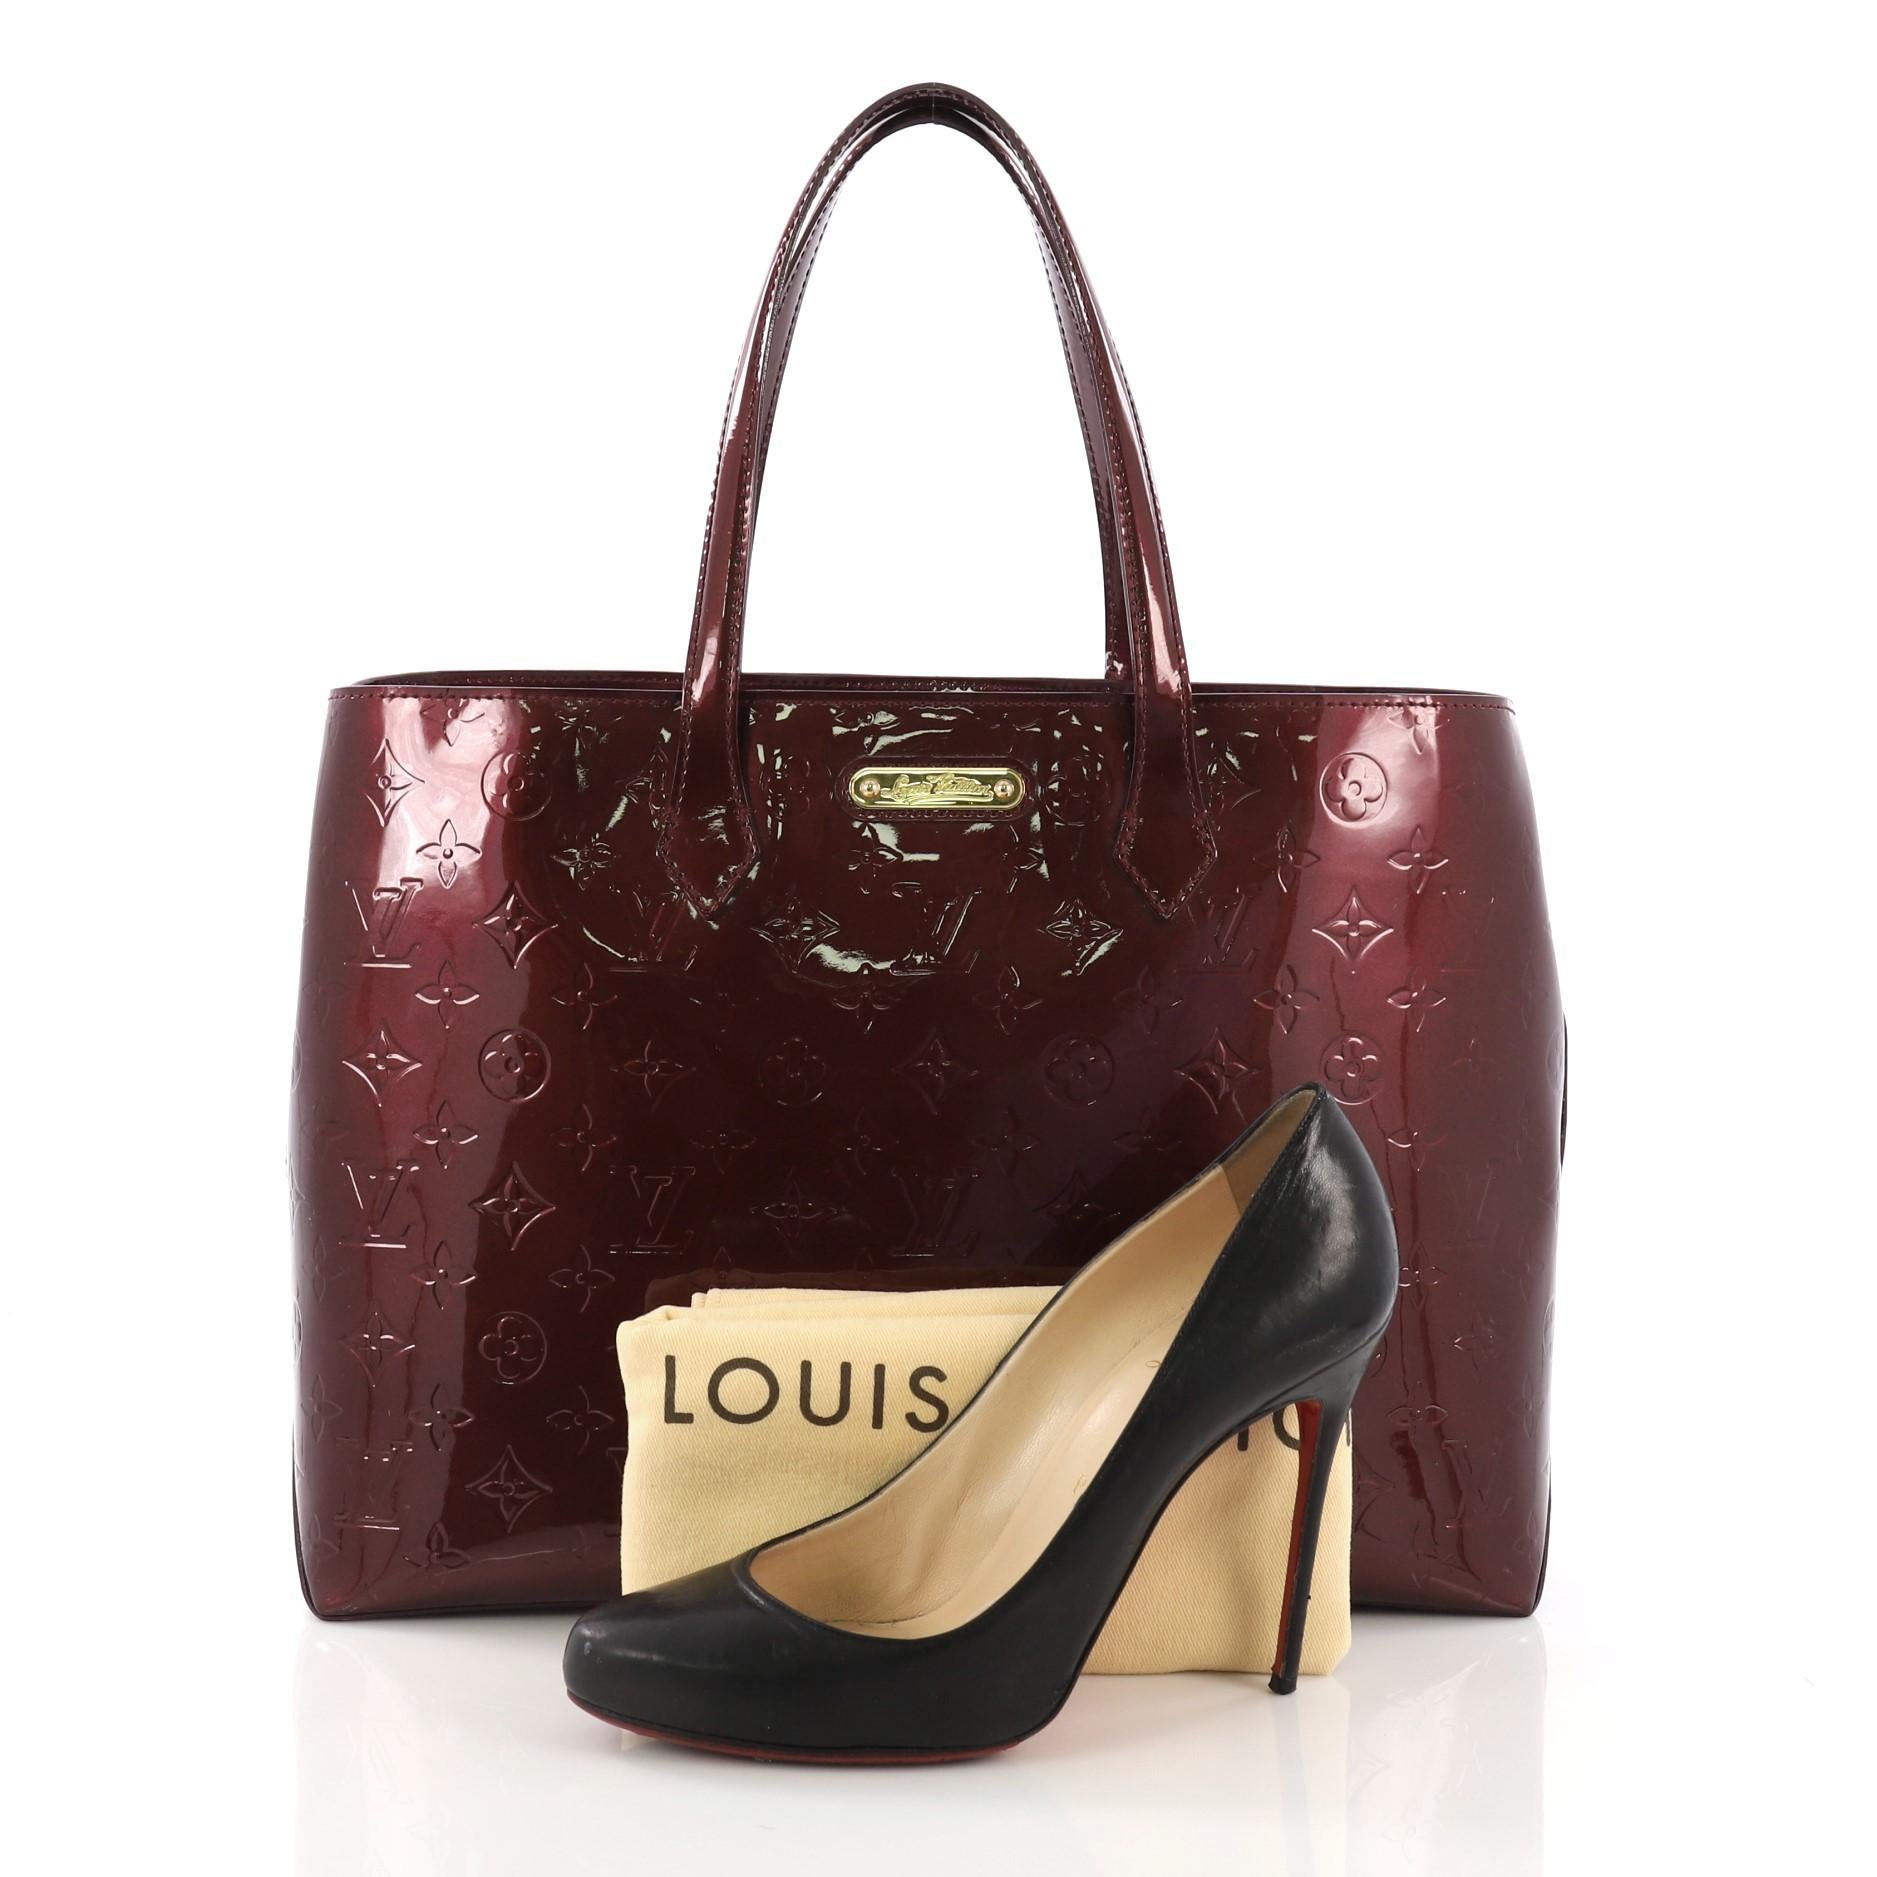 This Louis Vuitton Wilshire Handbag Monogram Vernis MM, crafted in burgundy monogram vernis leather, features dual flat handles and gold-tone hardware. Its wide top with hook closure opens to a burgundy fabric interior with zip and slip pockets.